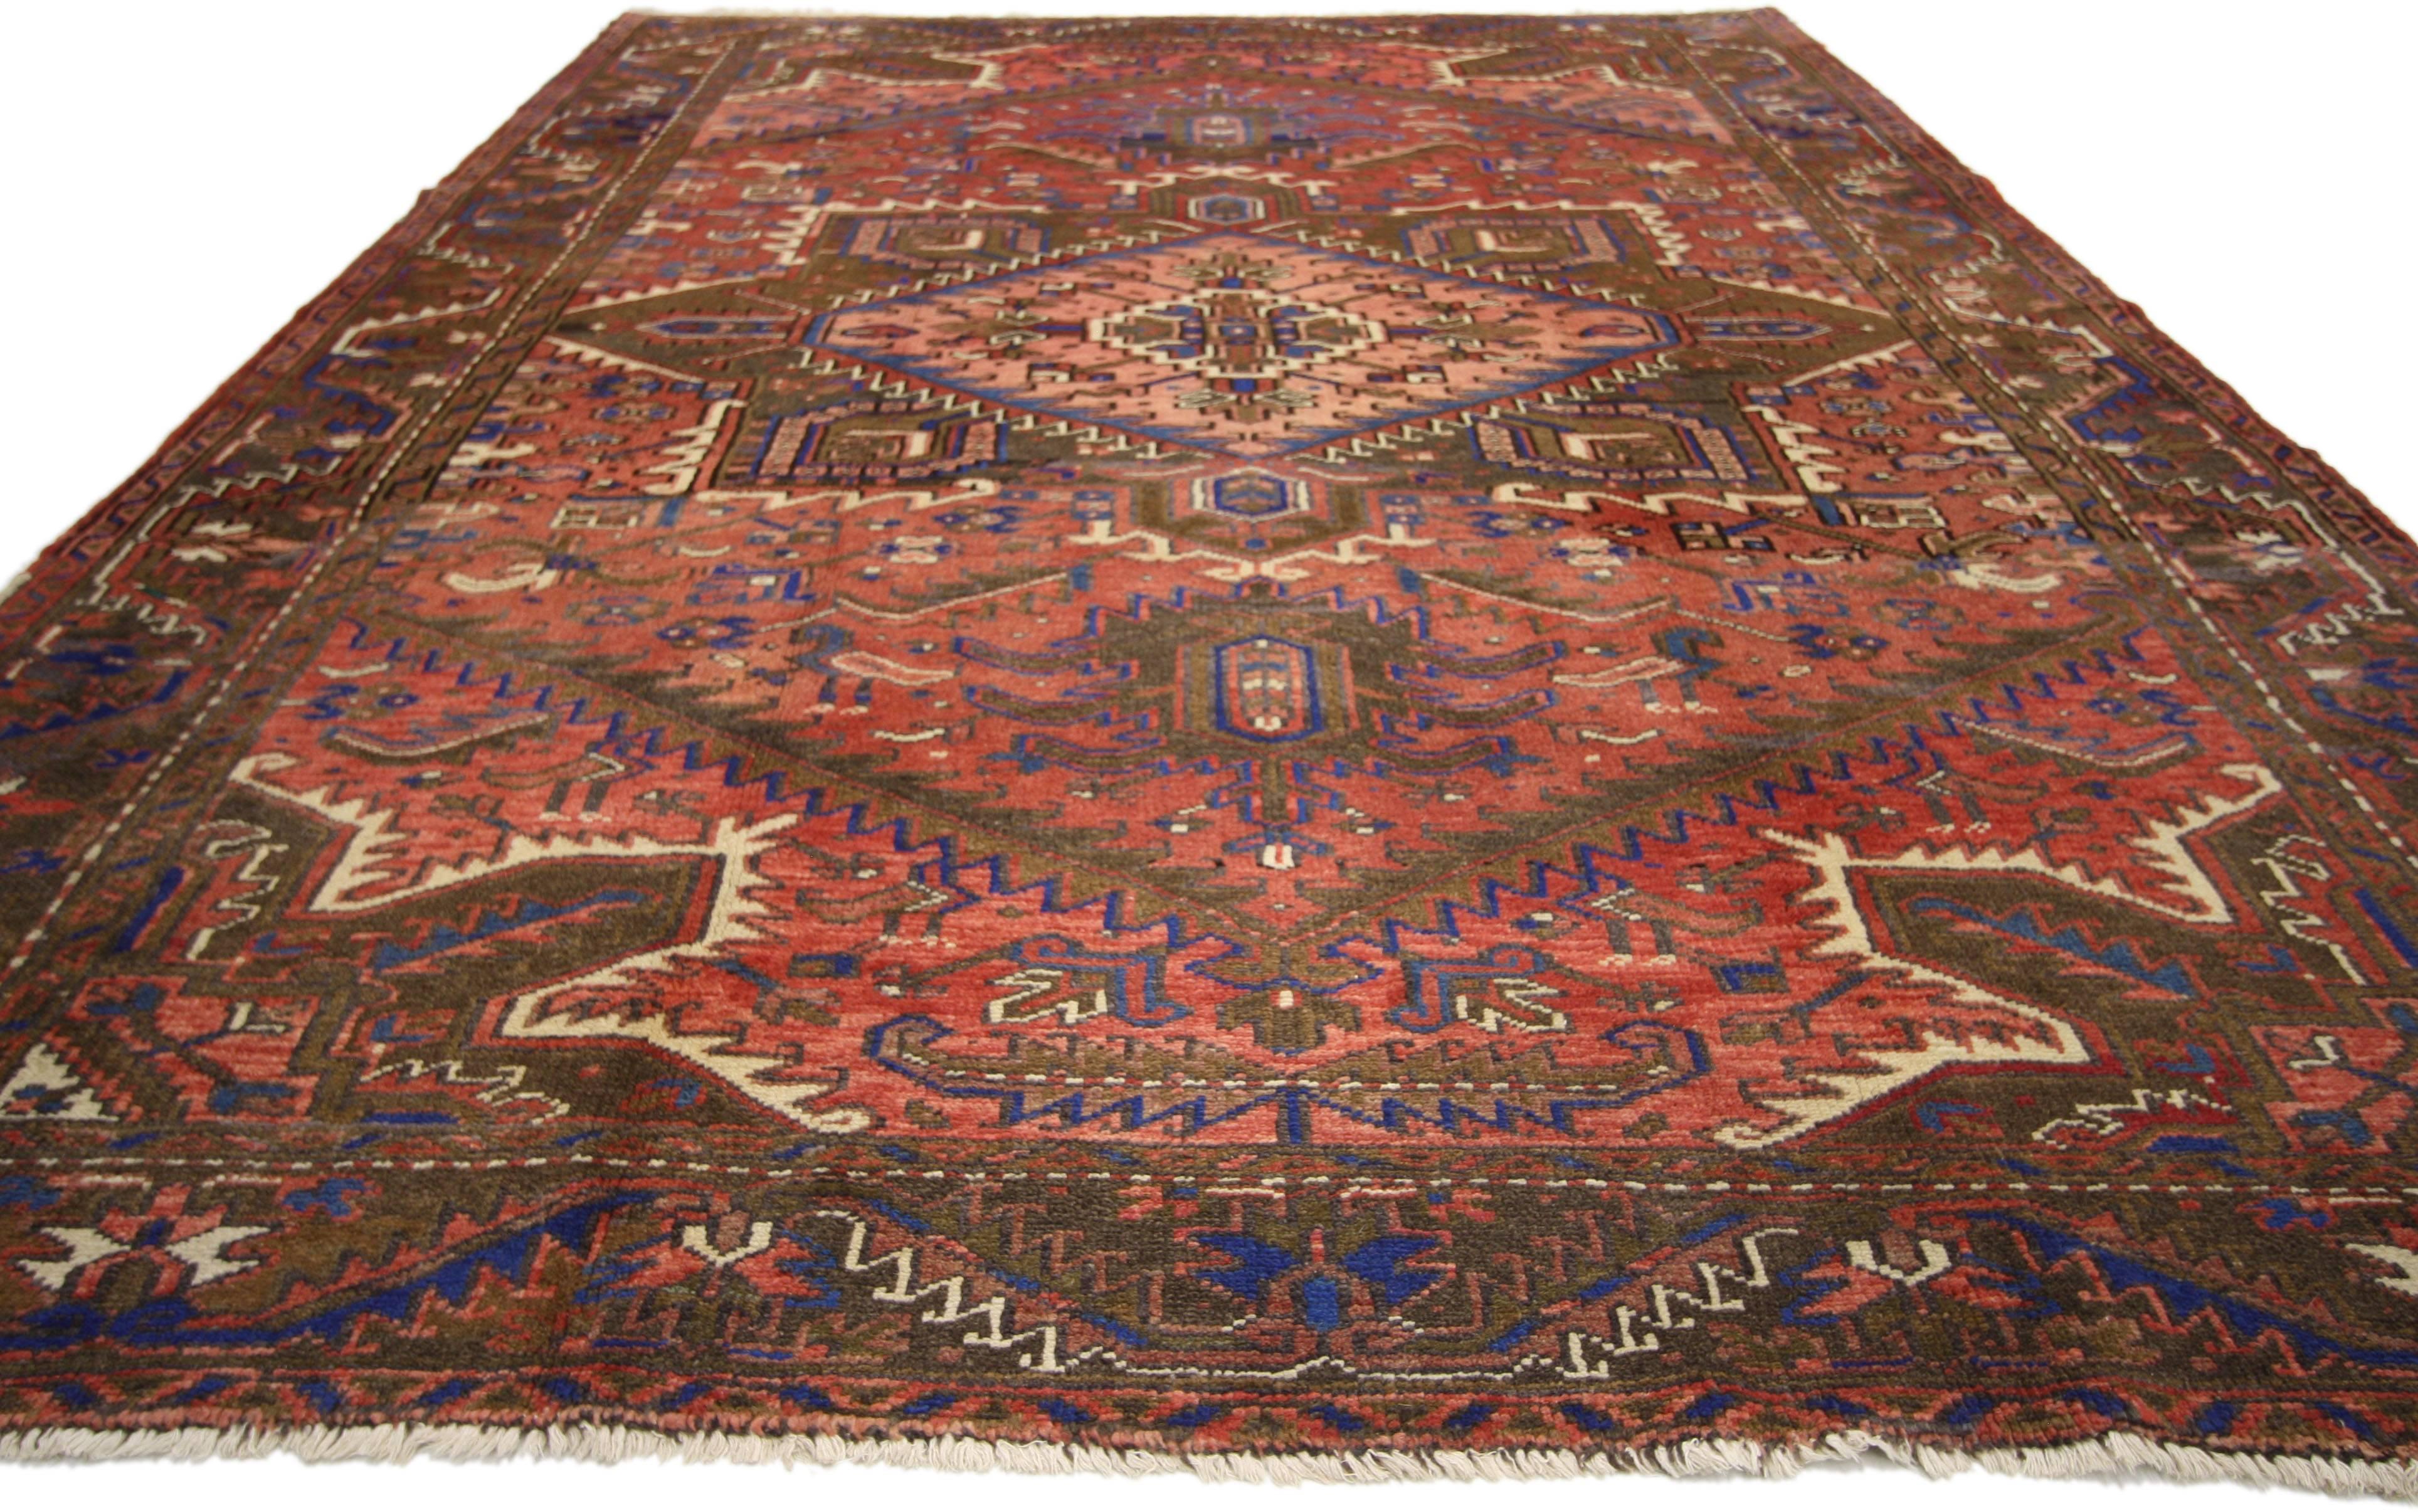 76241, traditional vintage Persian Heriz rug with modern Rustic style. This hand knotted wool vintage Persian Heriz rug features a large serrated octofoil medallion with palmette pendants floating in the center of an abrashed red field. The